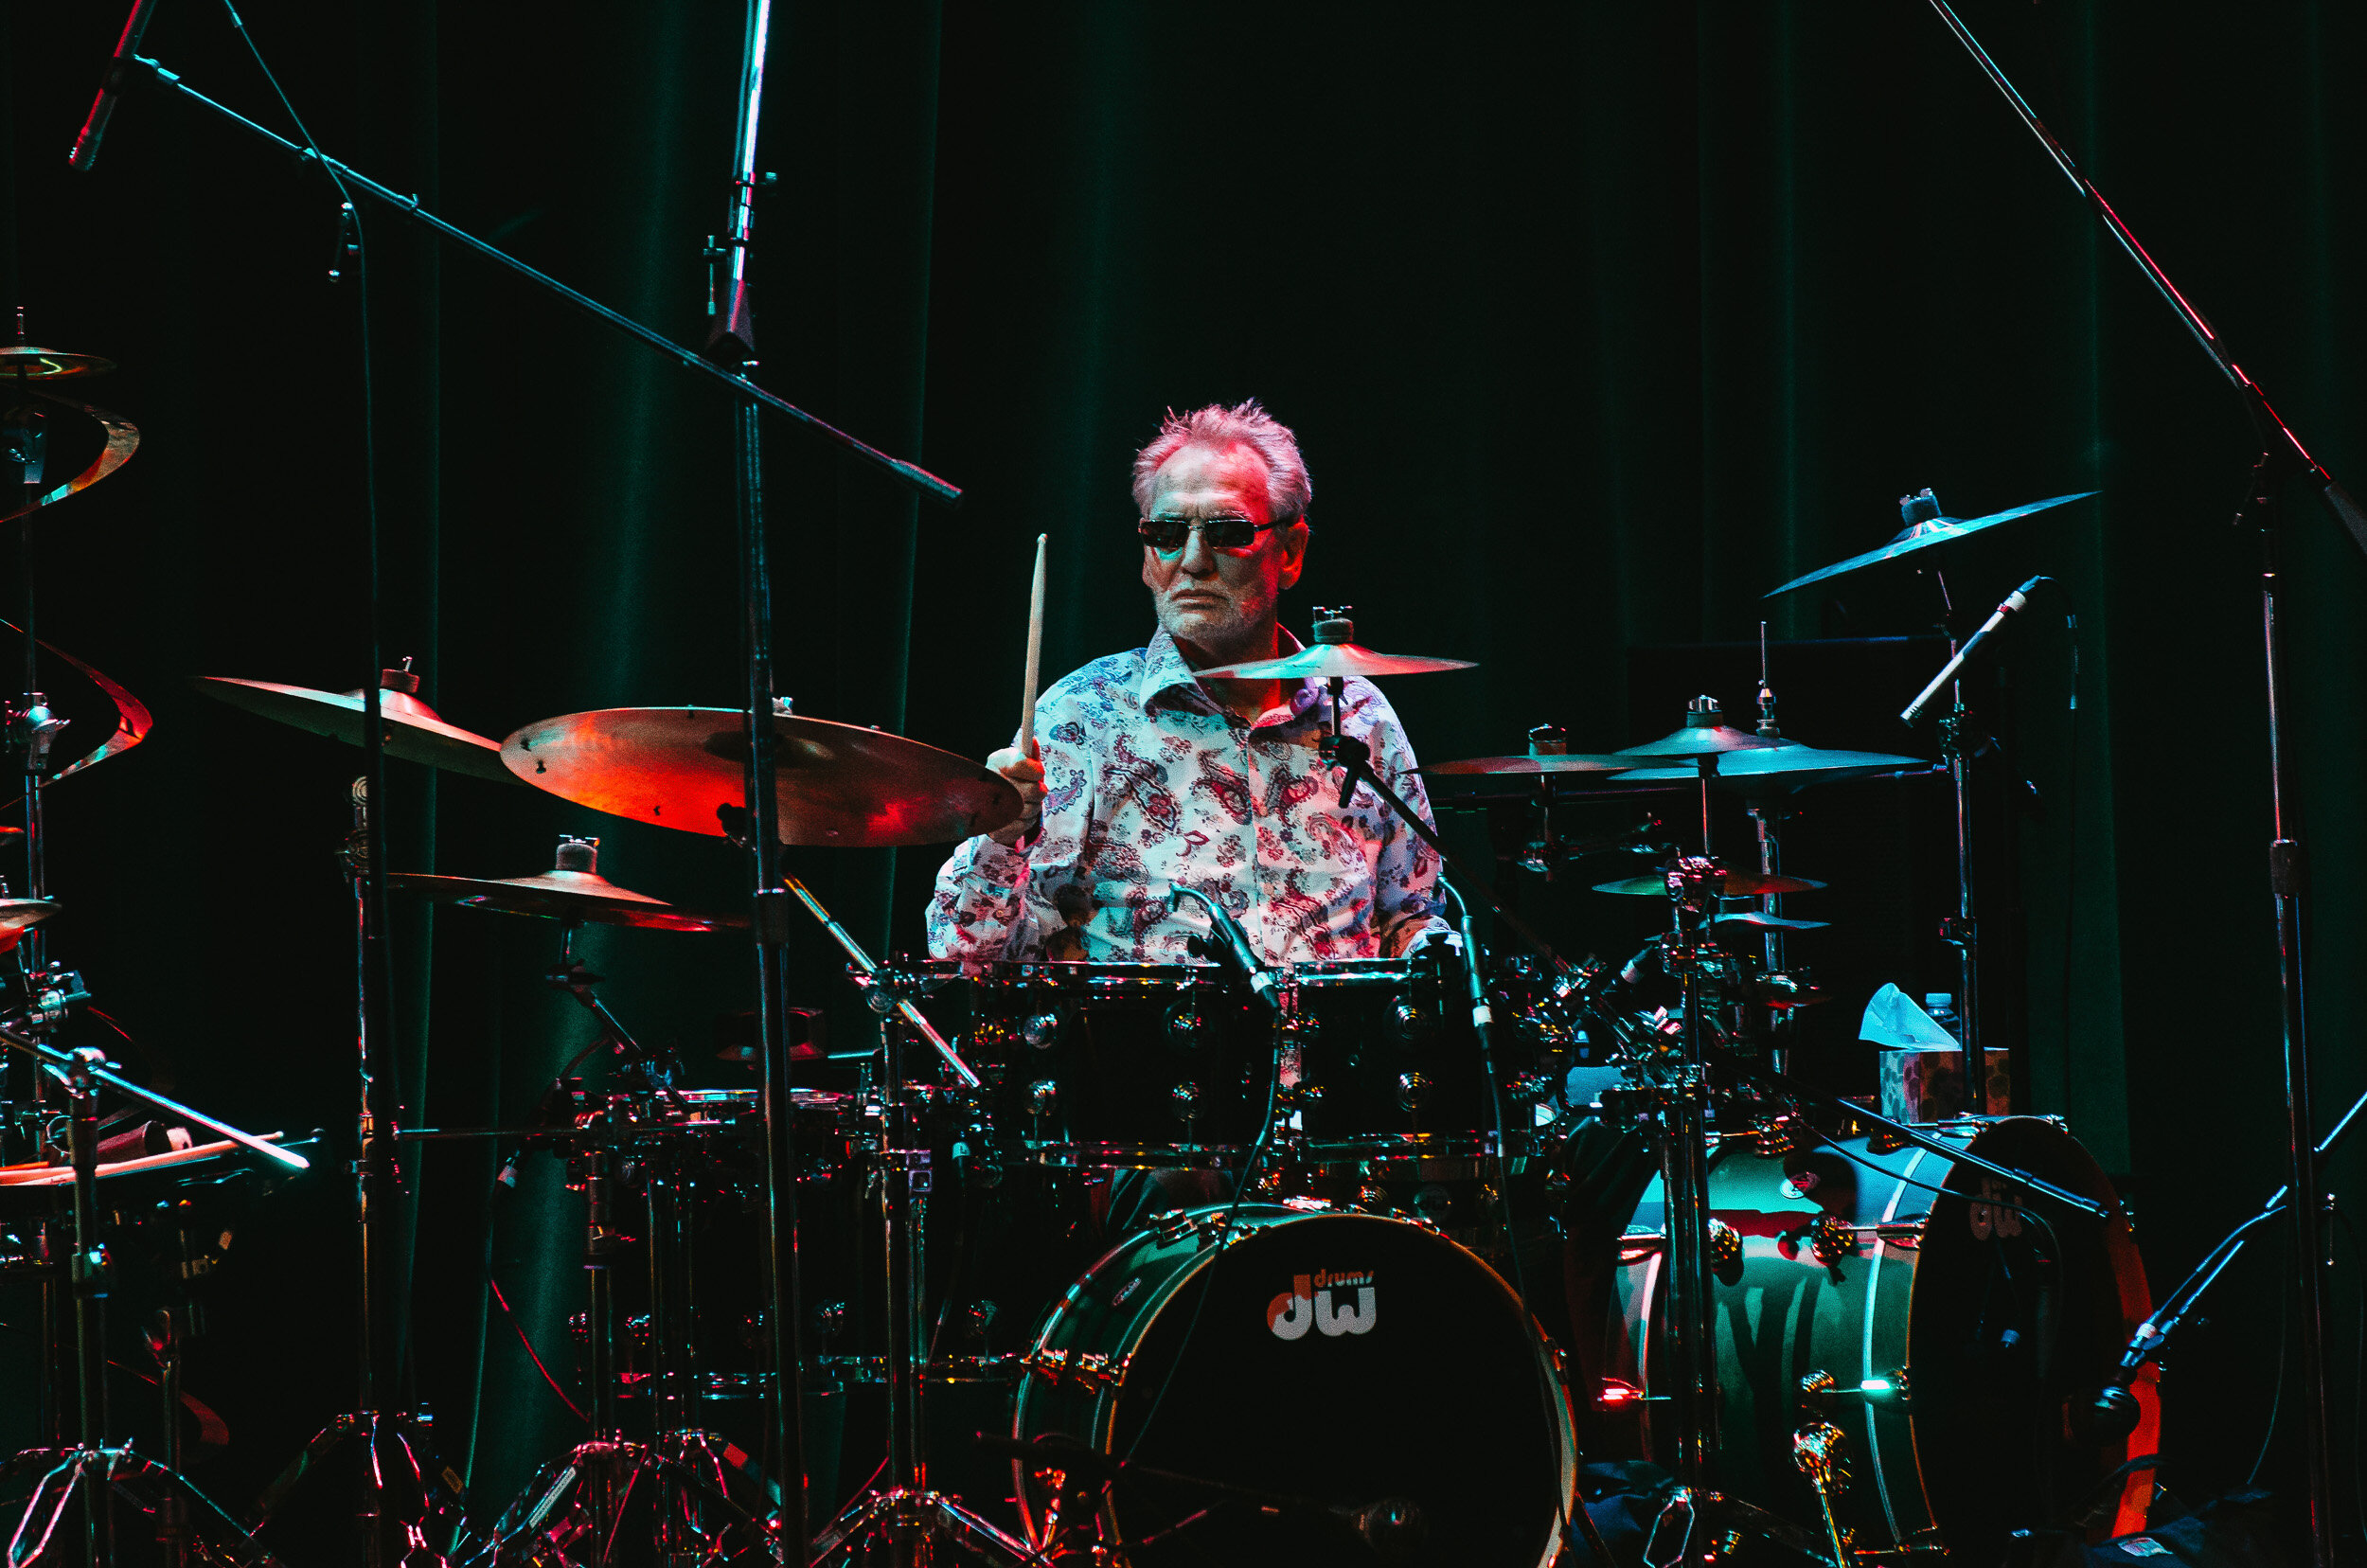 Ginger Baker by Victoria Ford (Sneakshot Photography)